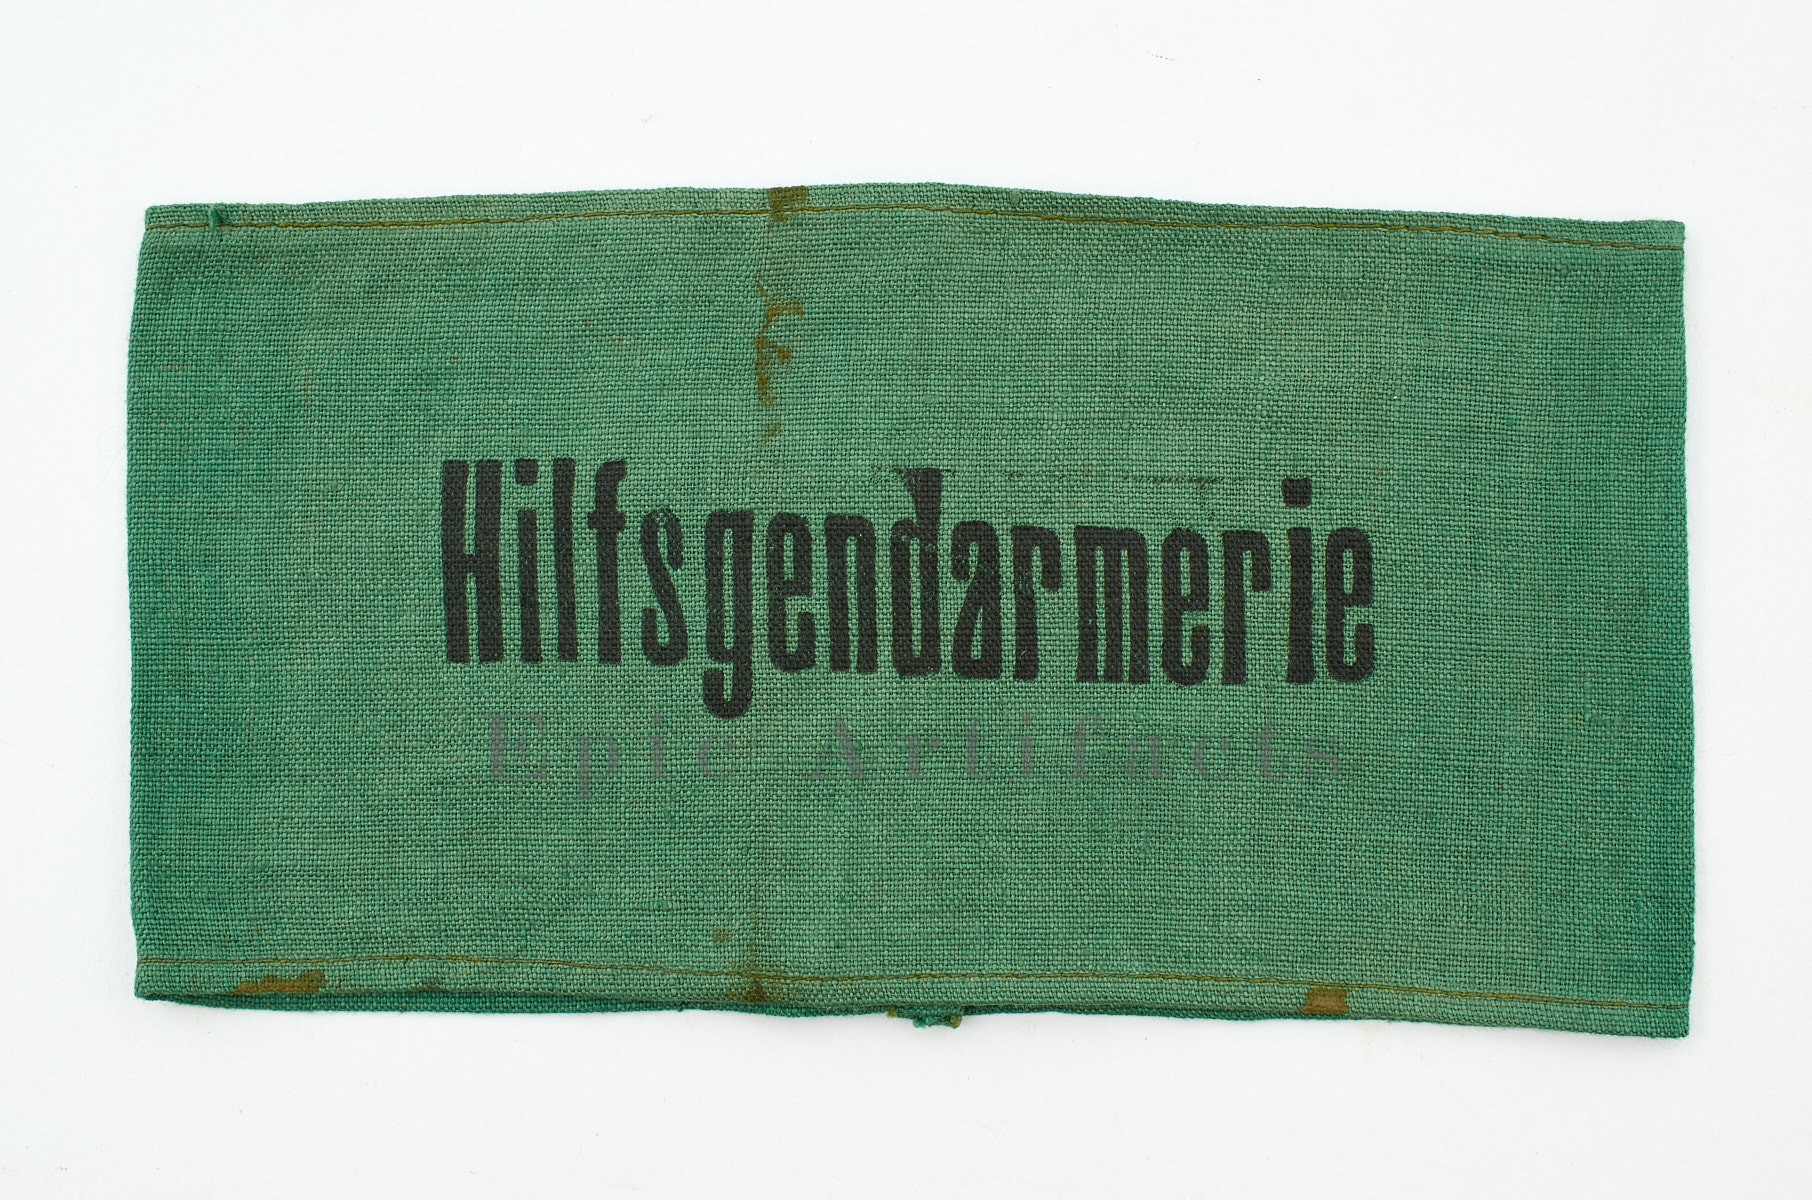 Auxiliary Police Hilfsgendarmerie Artifacts - Epic Armband